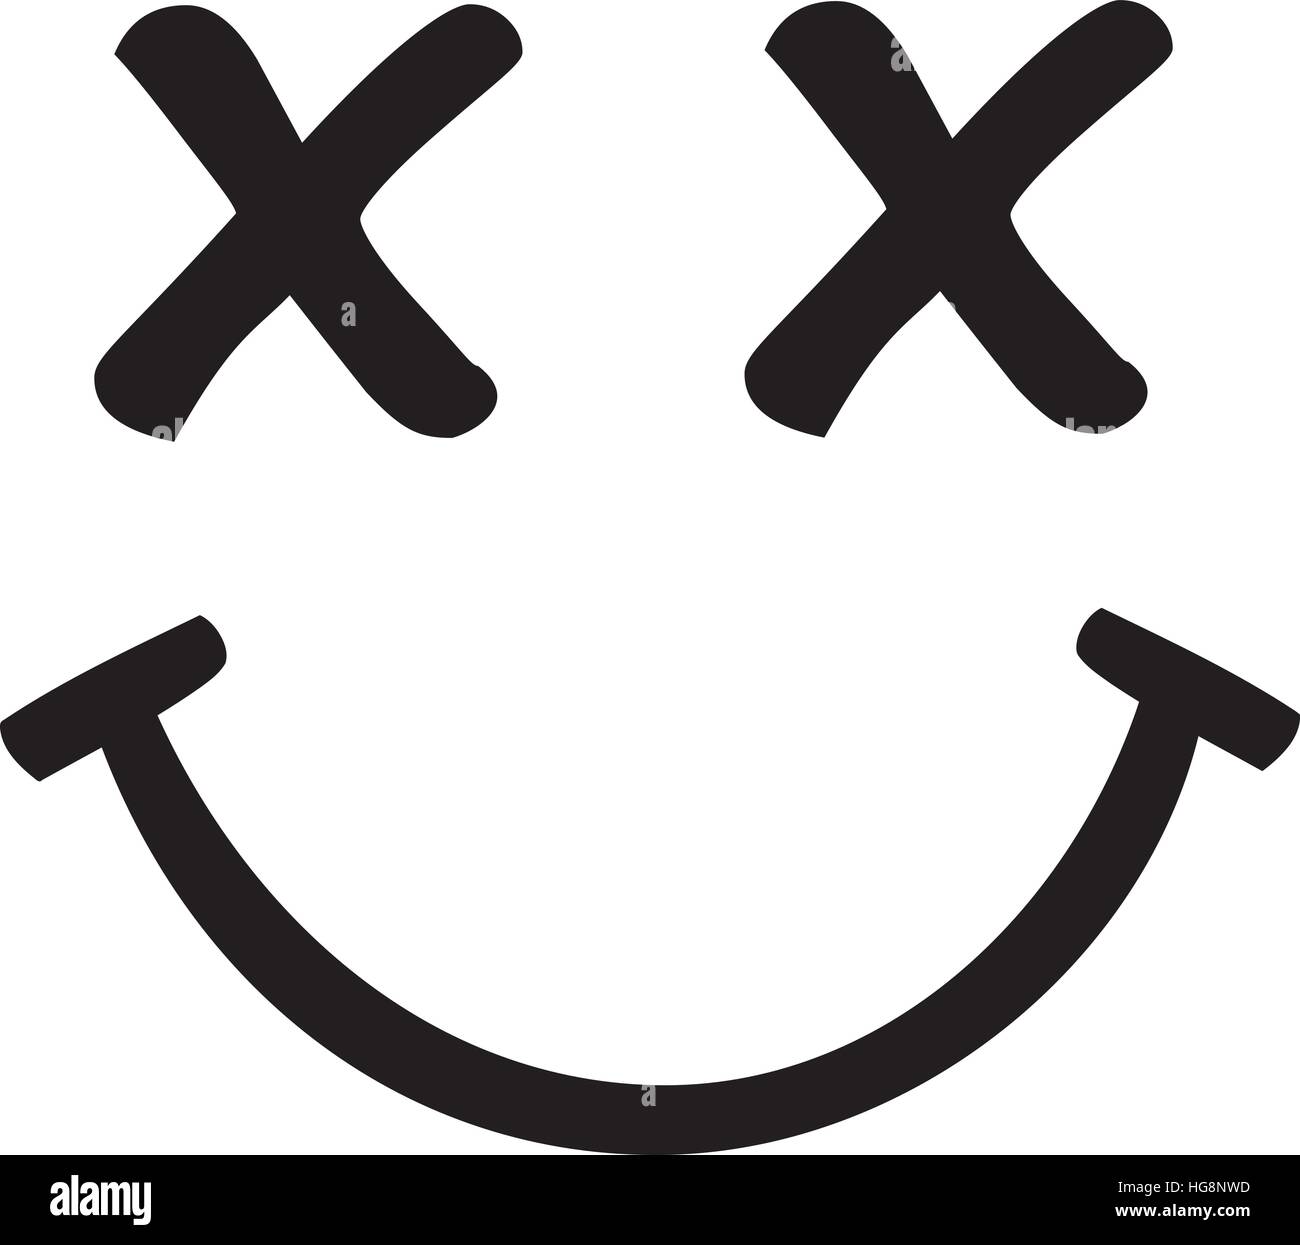 Smiley face with crossed eyes Stock Vector